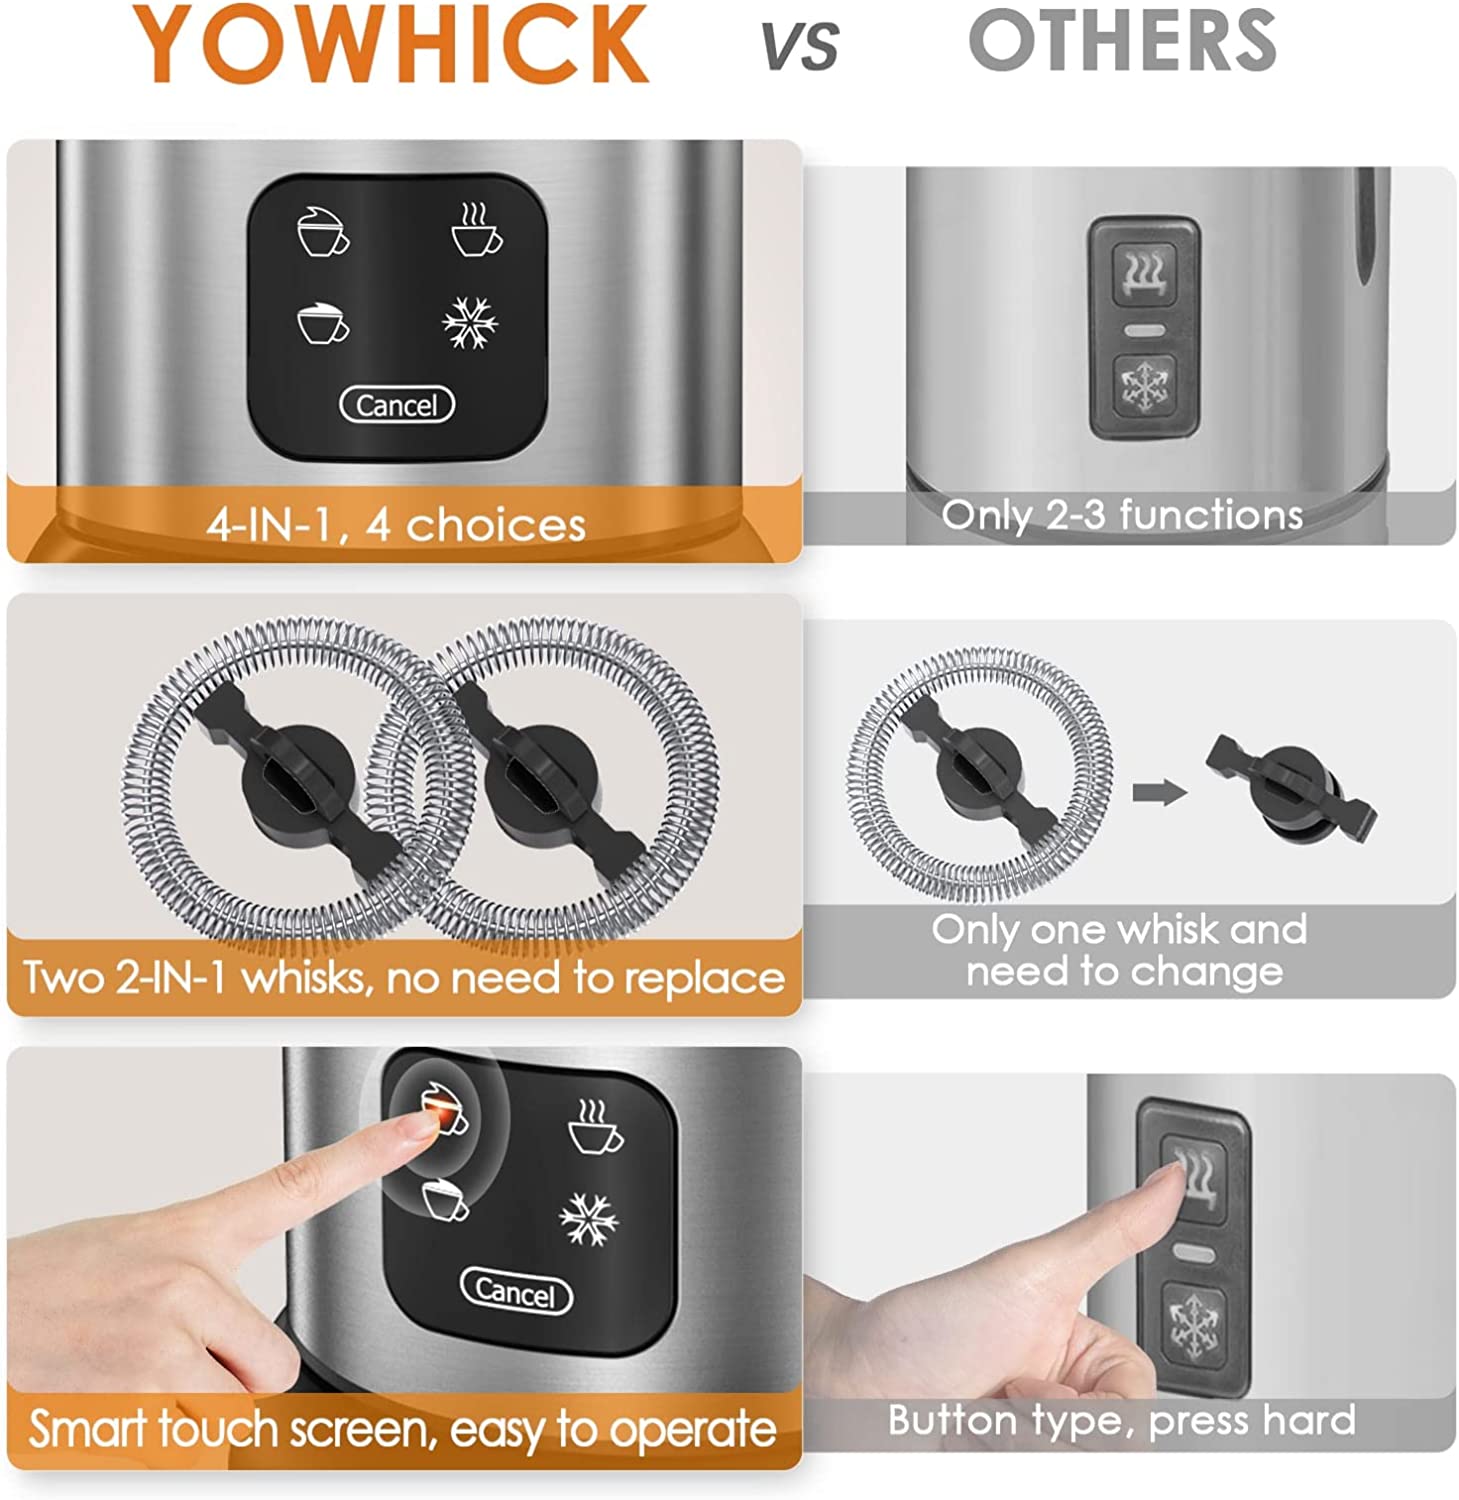 YOWHICK Milk Frother for Coffee, Milk Steamer and Frother, 4 Modes  Automatic Electric Milk Warmers and Foam Maker for Lattes, Cappuccinos, Hot